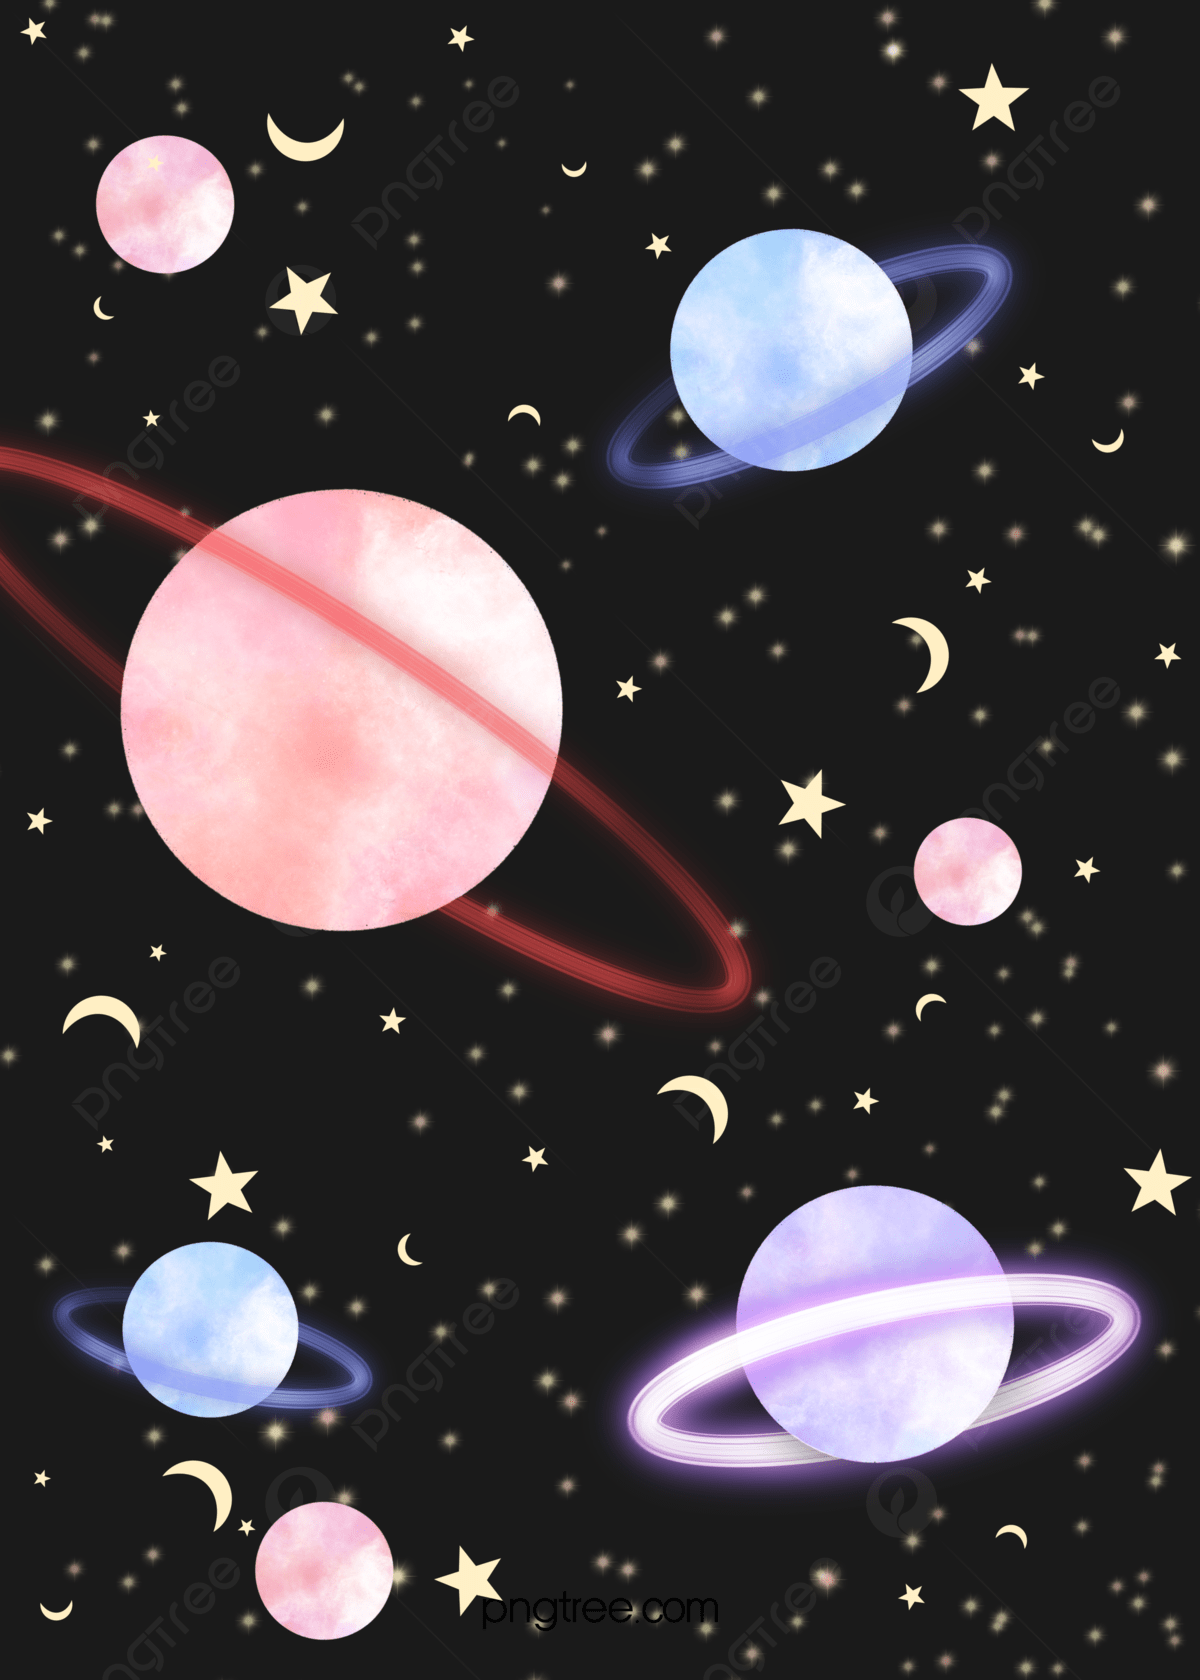 A set of planets and stars in space - Planet